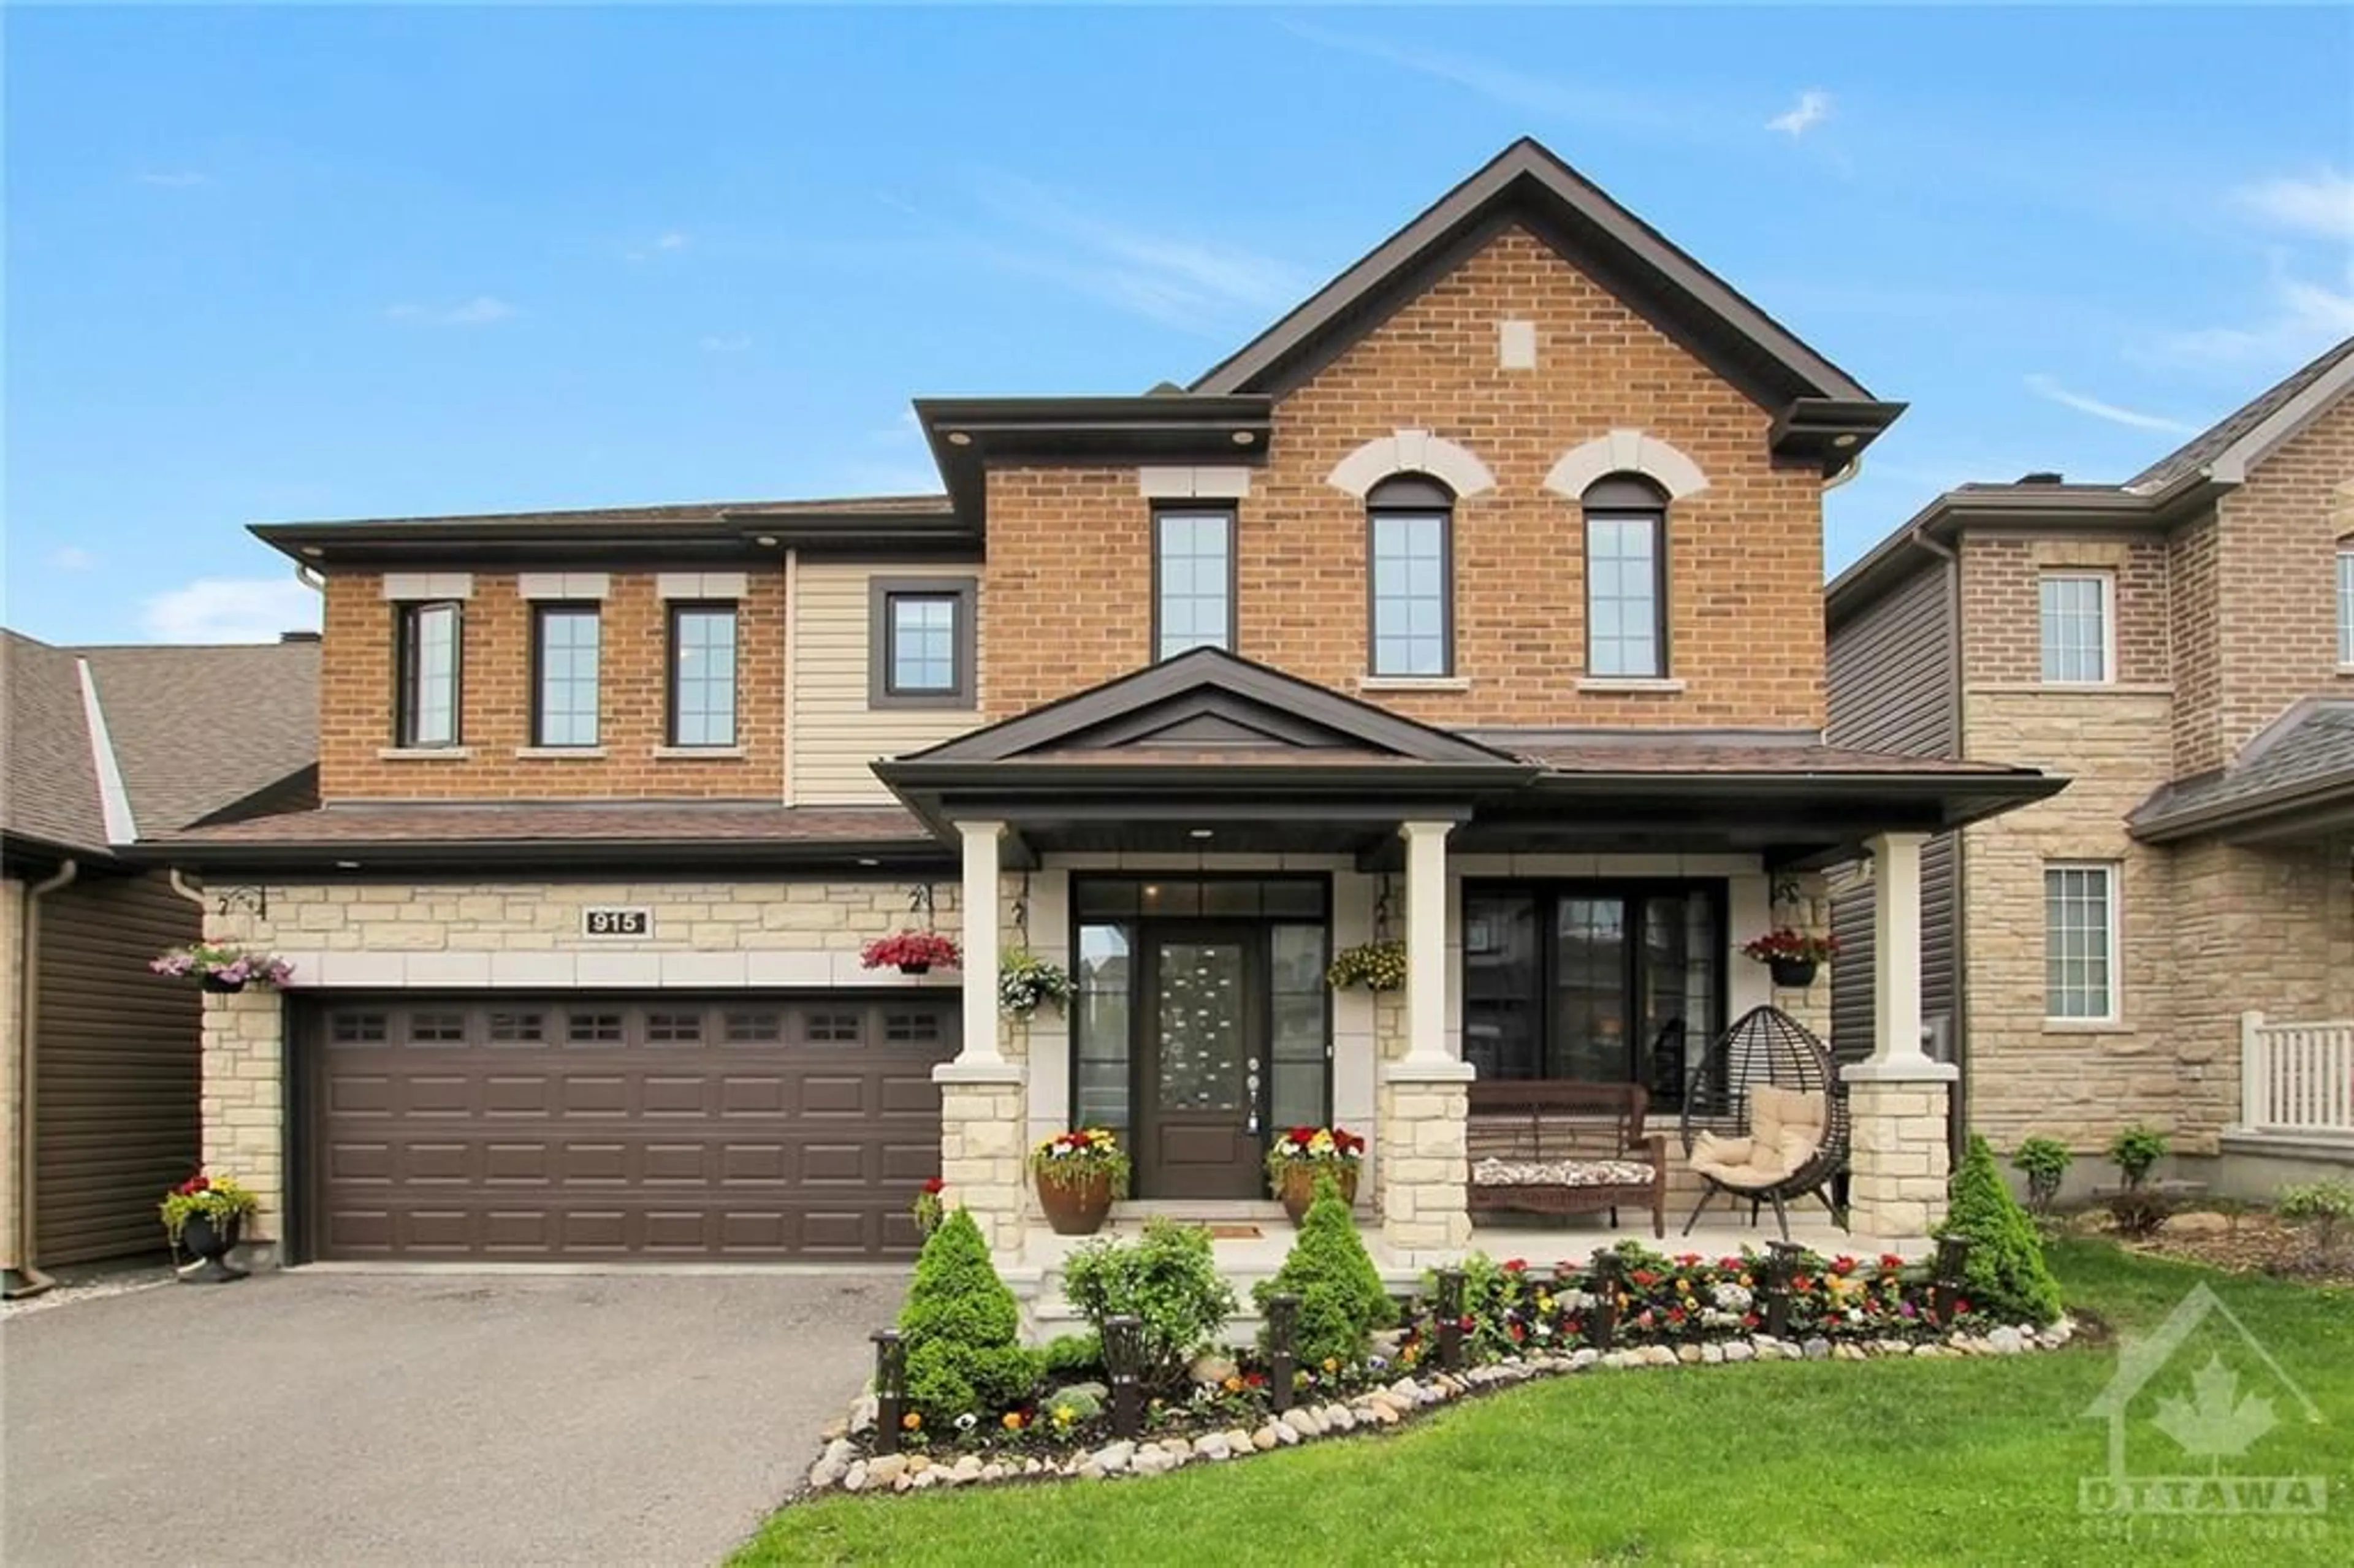 Home with brick exterior material for 915 GUINNESS Cres, Ottawa Ontario K2J 6G8